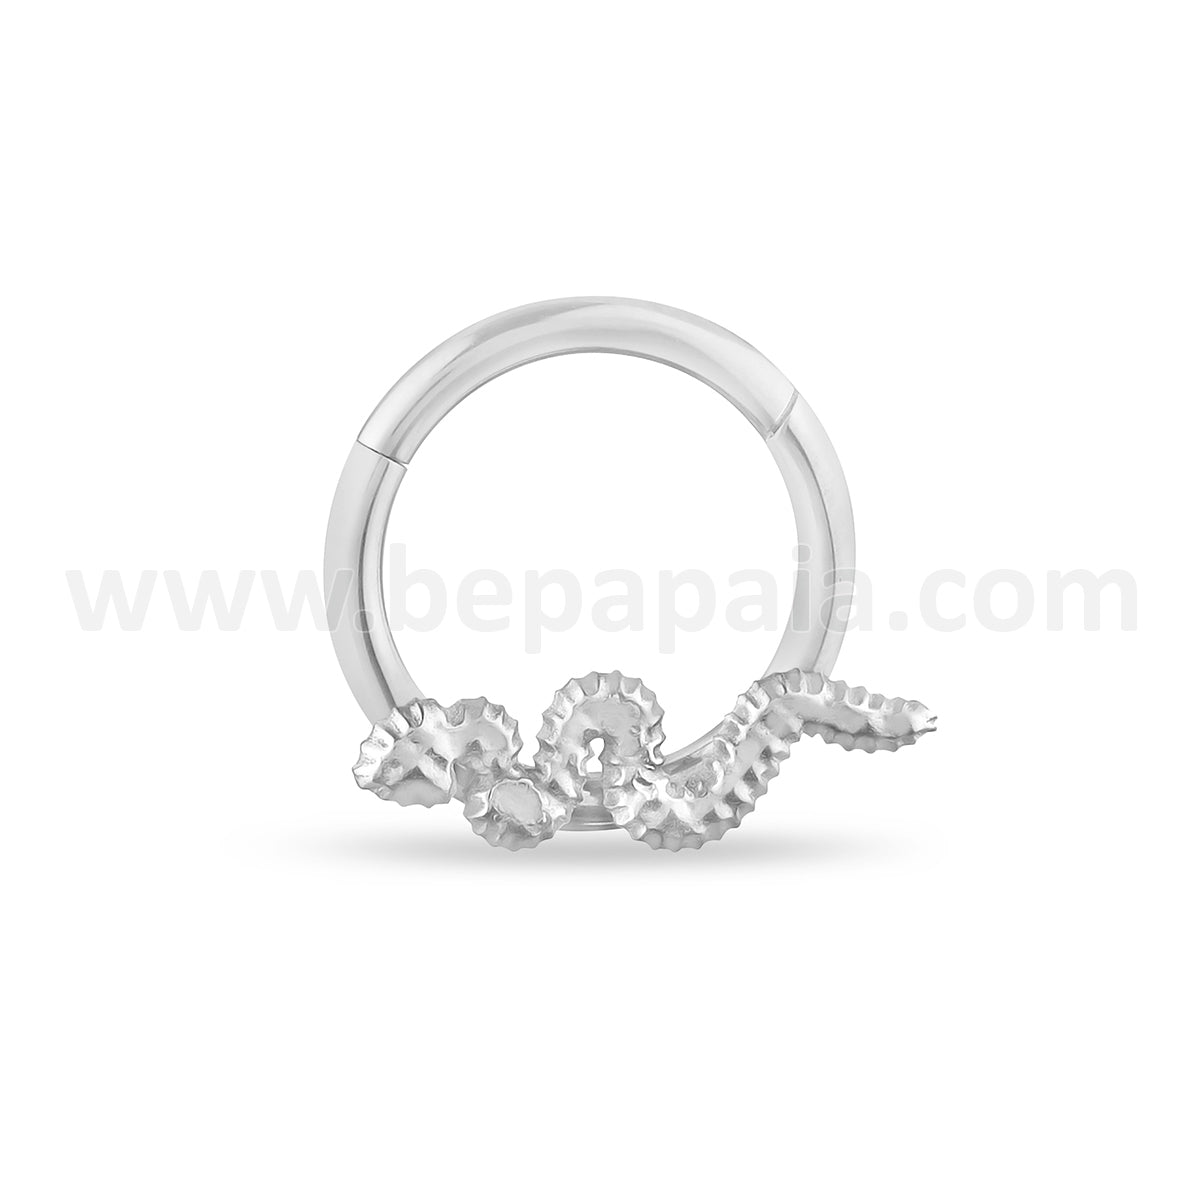 Hinged segment ring with snake